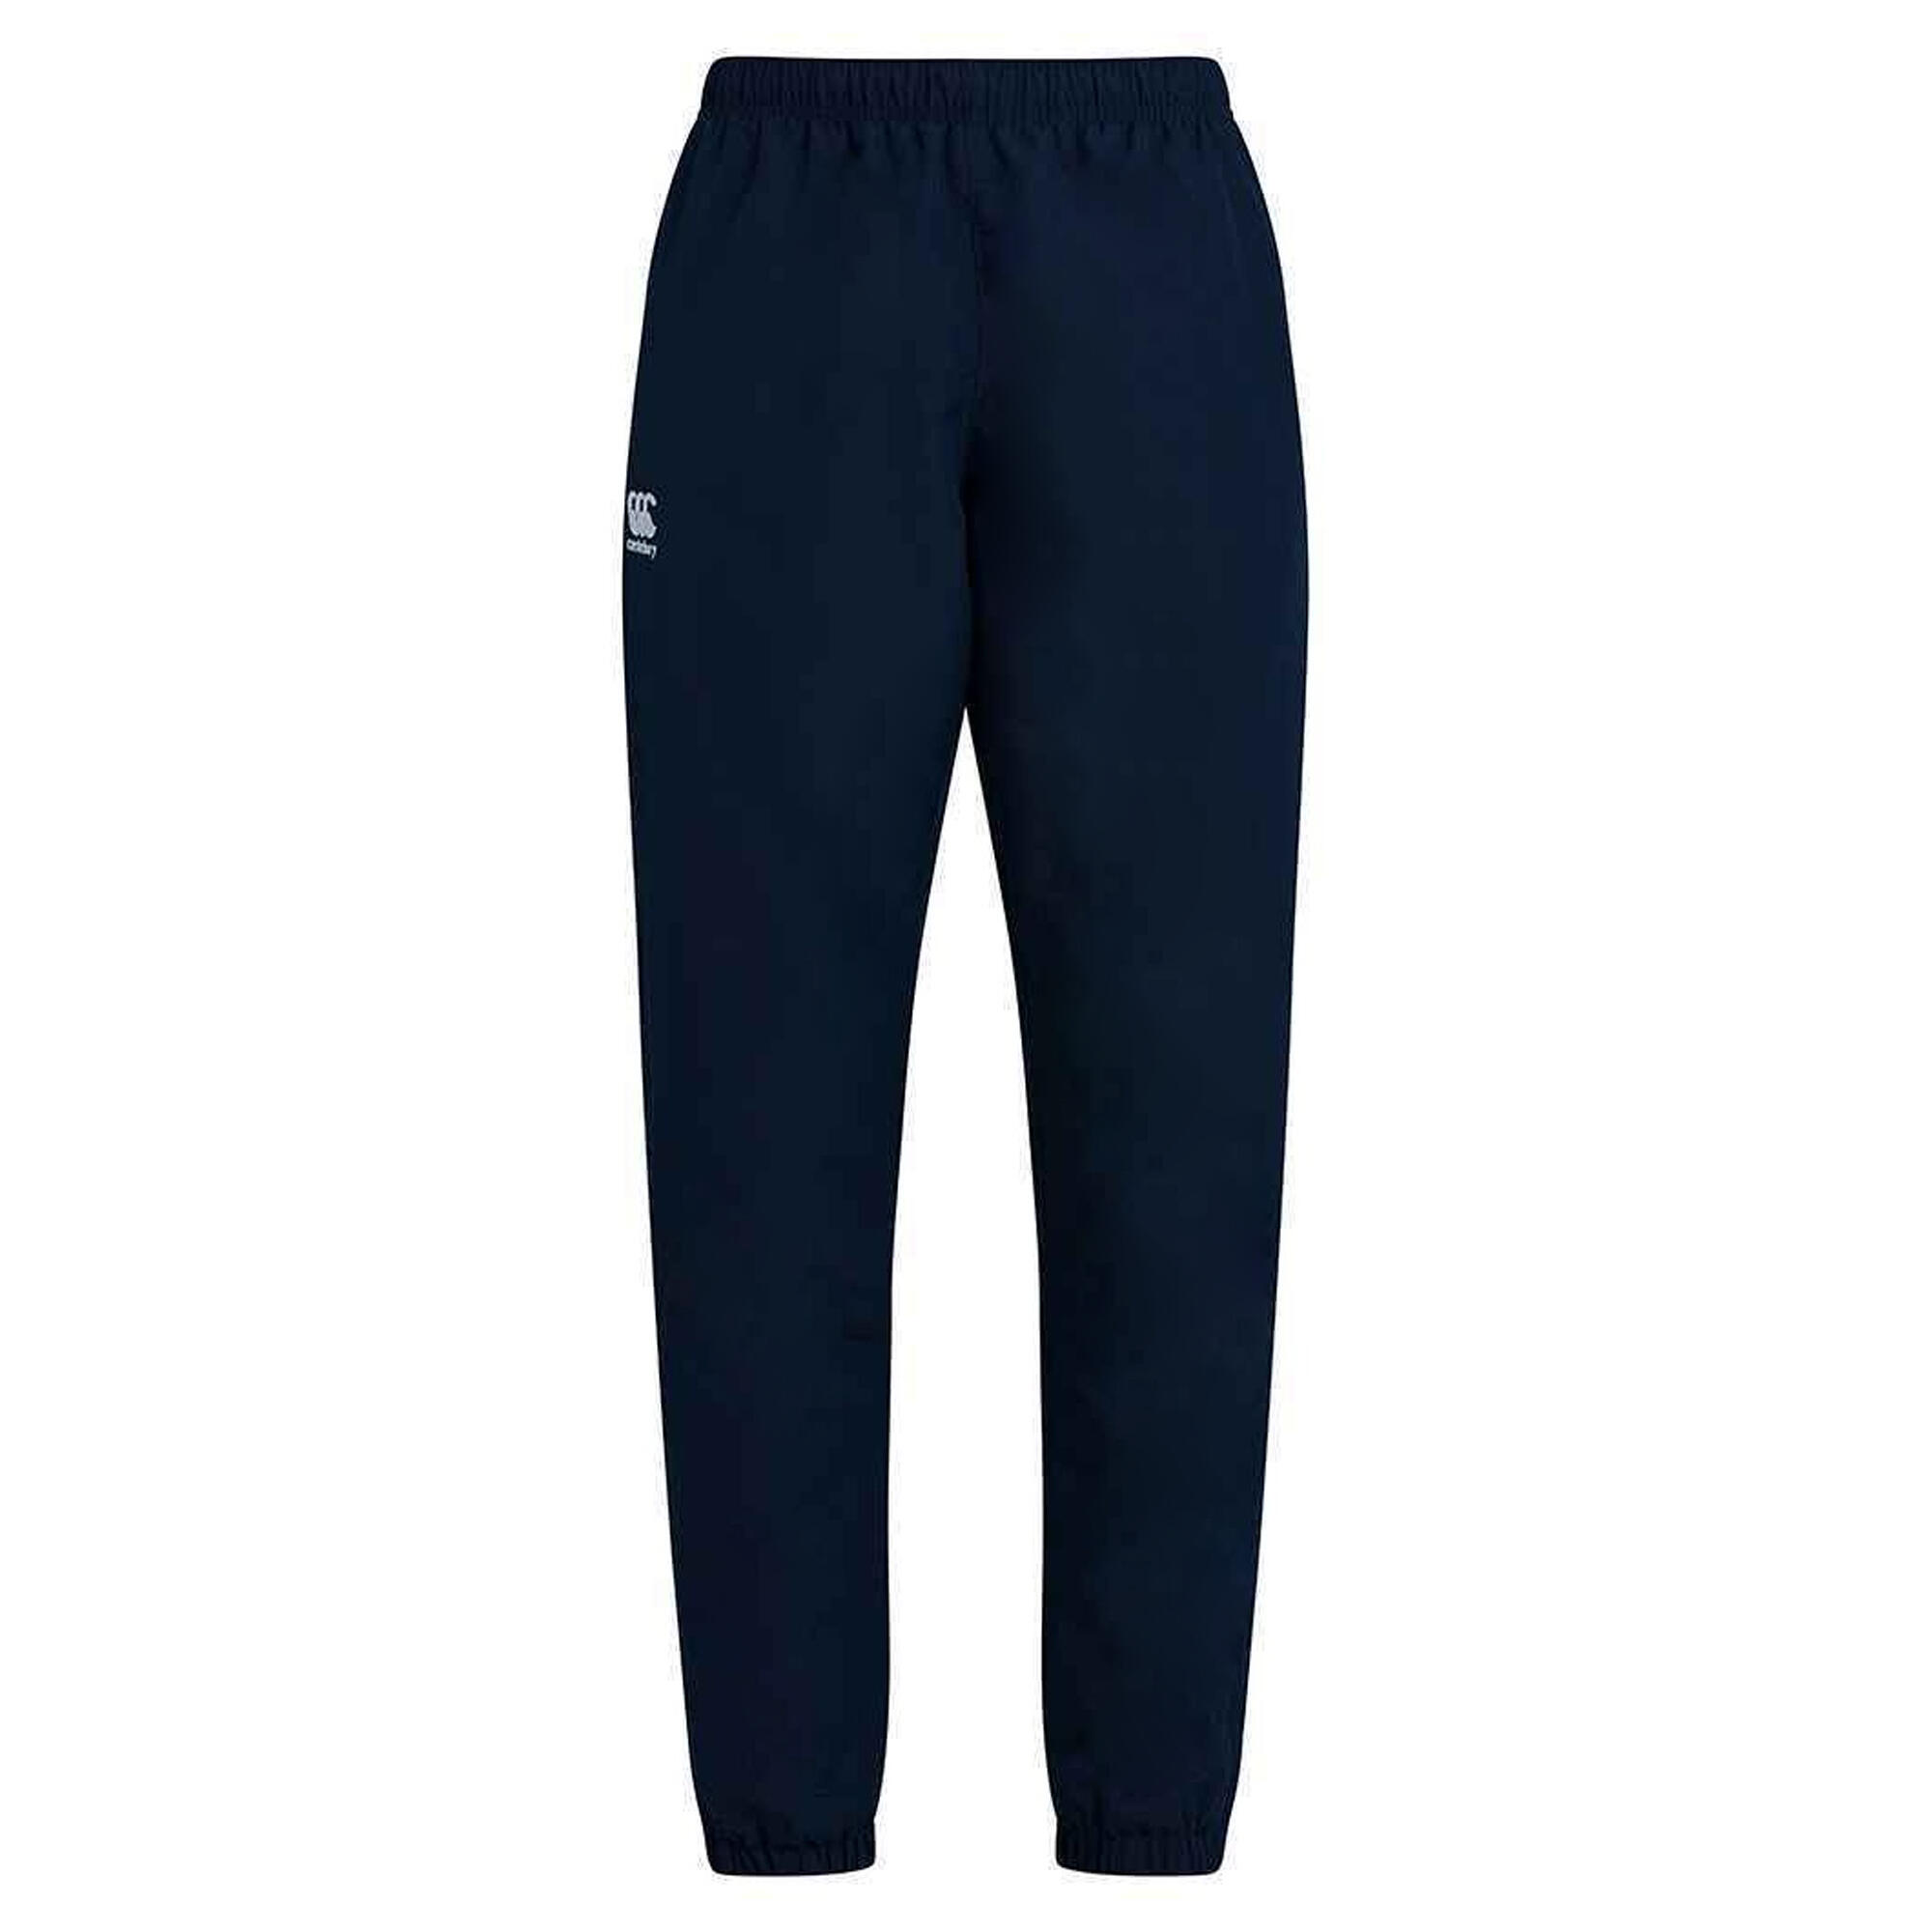 Mens Club Tracksuit Bottoms (Navy) 1/3